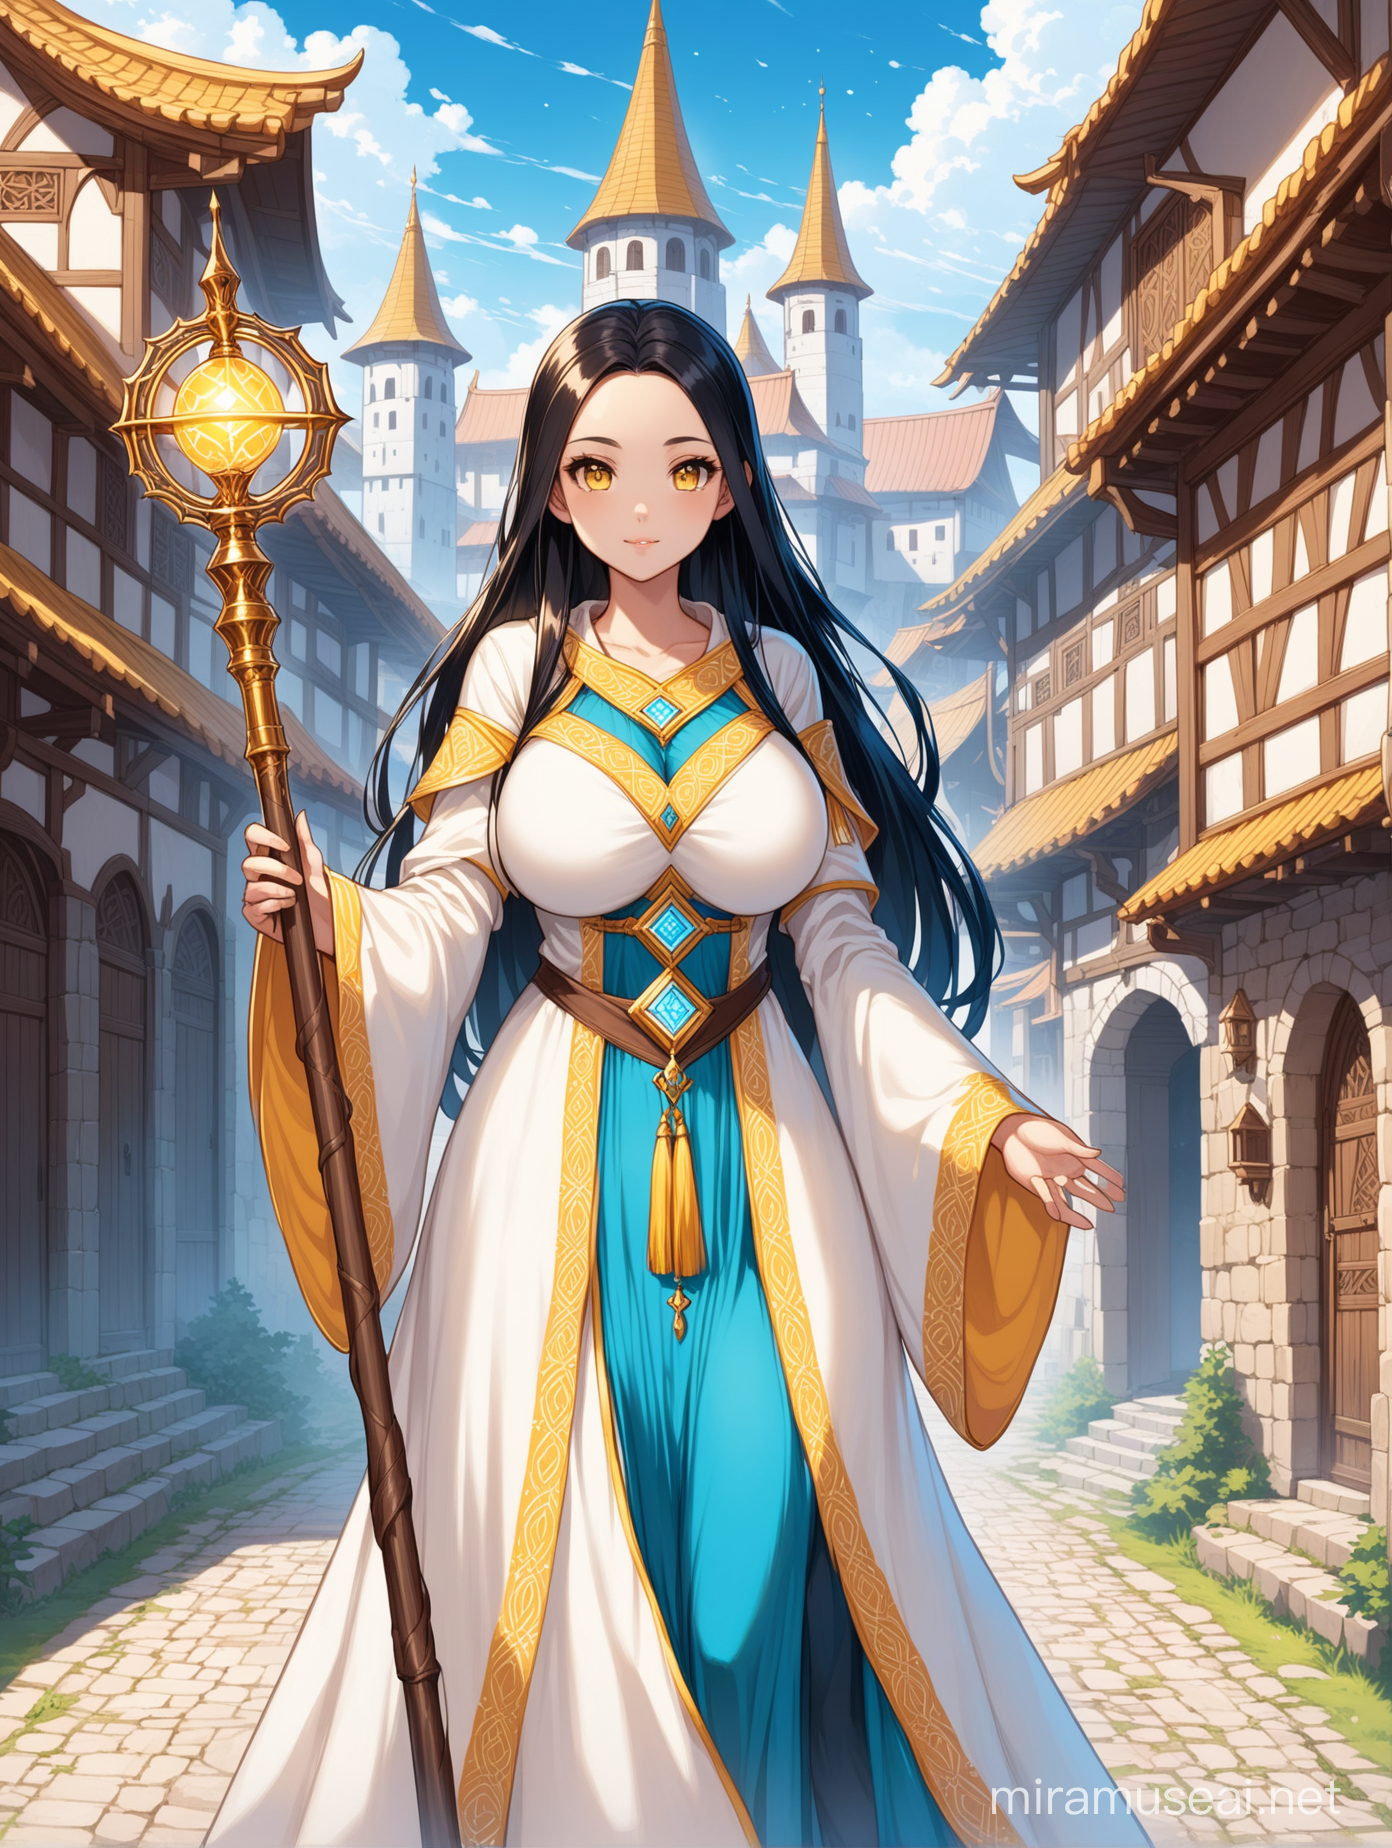 Fantasy RPG Style Priestess with Magic Staff in Vibrant Townscape